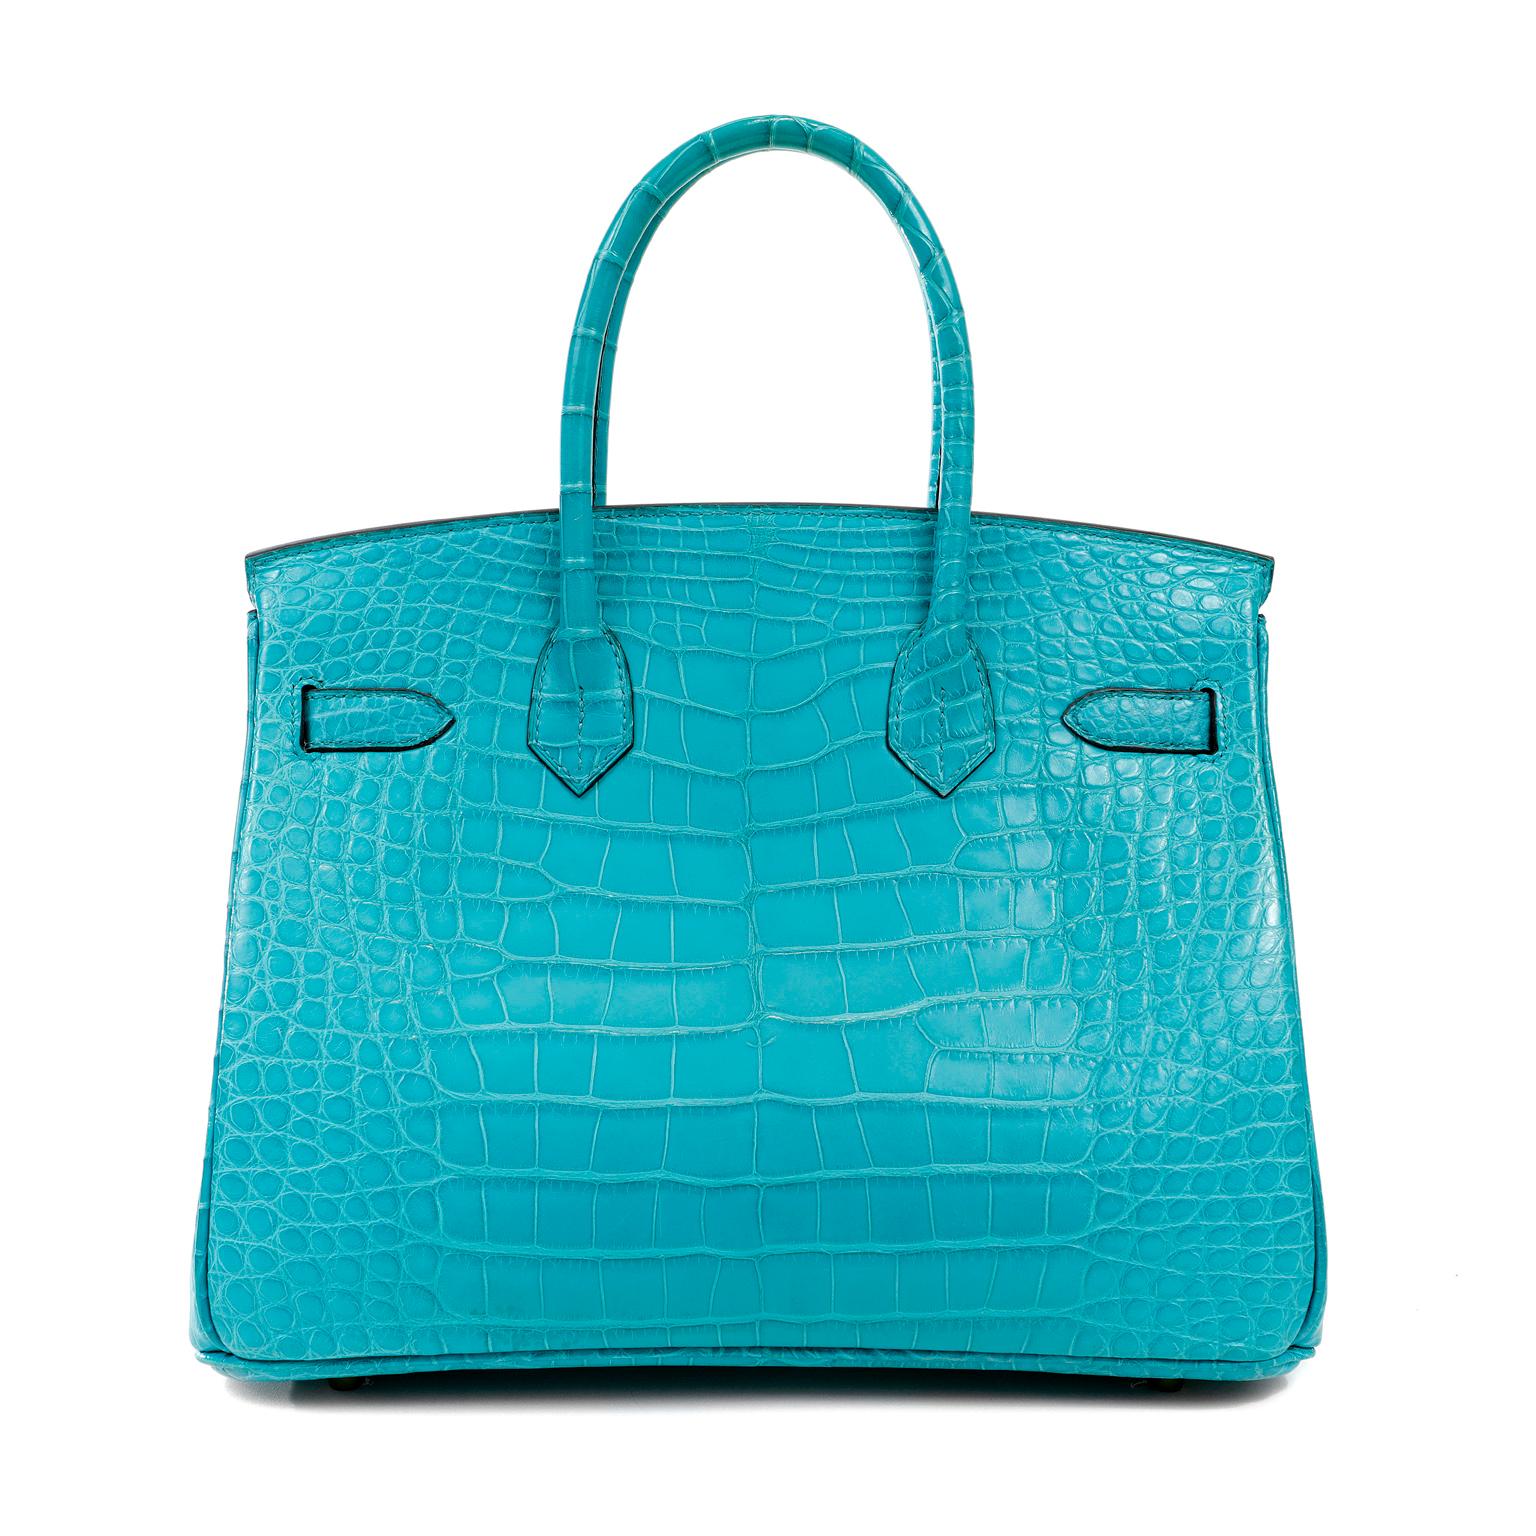 This authentic Hermès Blue Paon Crocodile 30 cm Birkin is in pristine unworn condition with the protective plastic intact on the hardware.   Hermès bags are considered the ultimate luxury item the world over.  Hand stitched by skilled craftsmen,